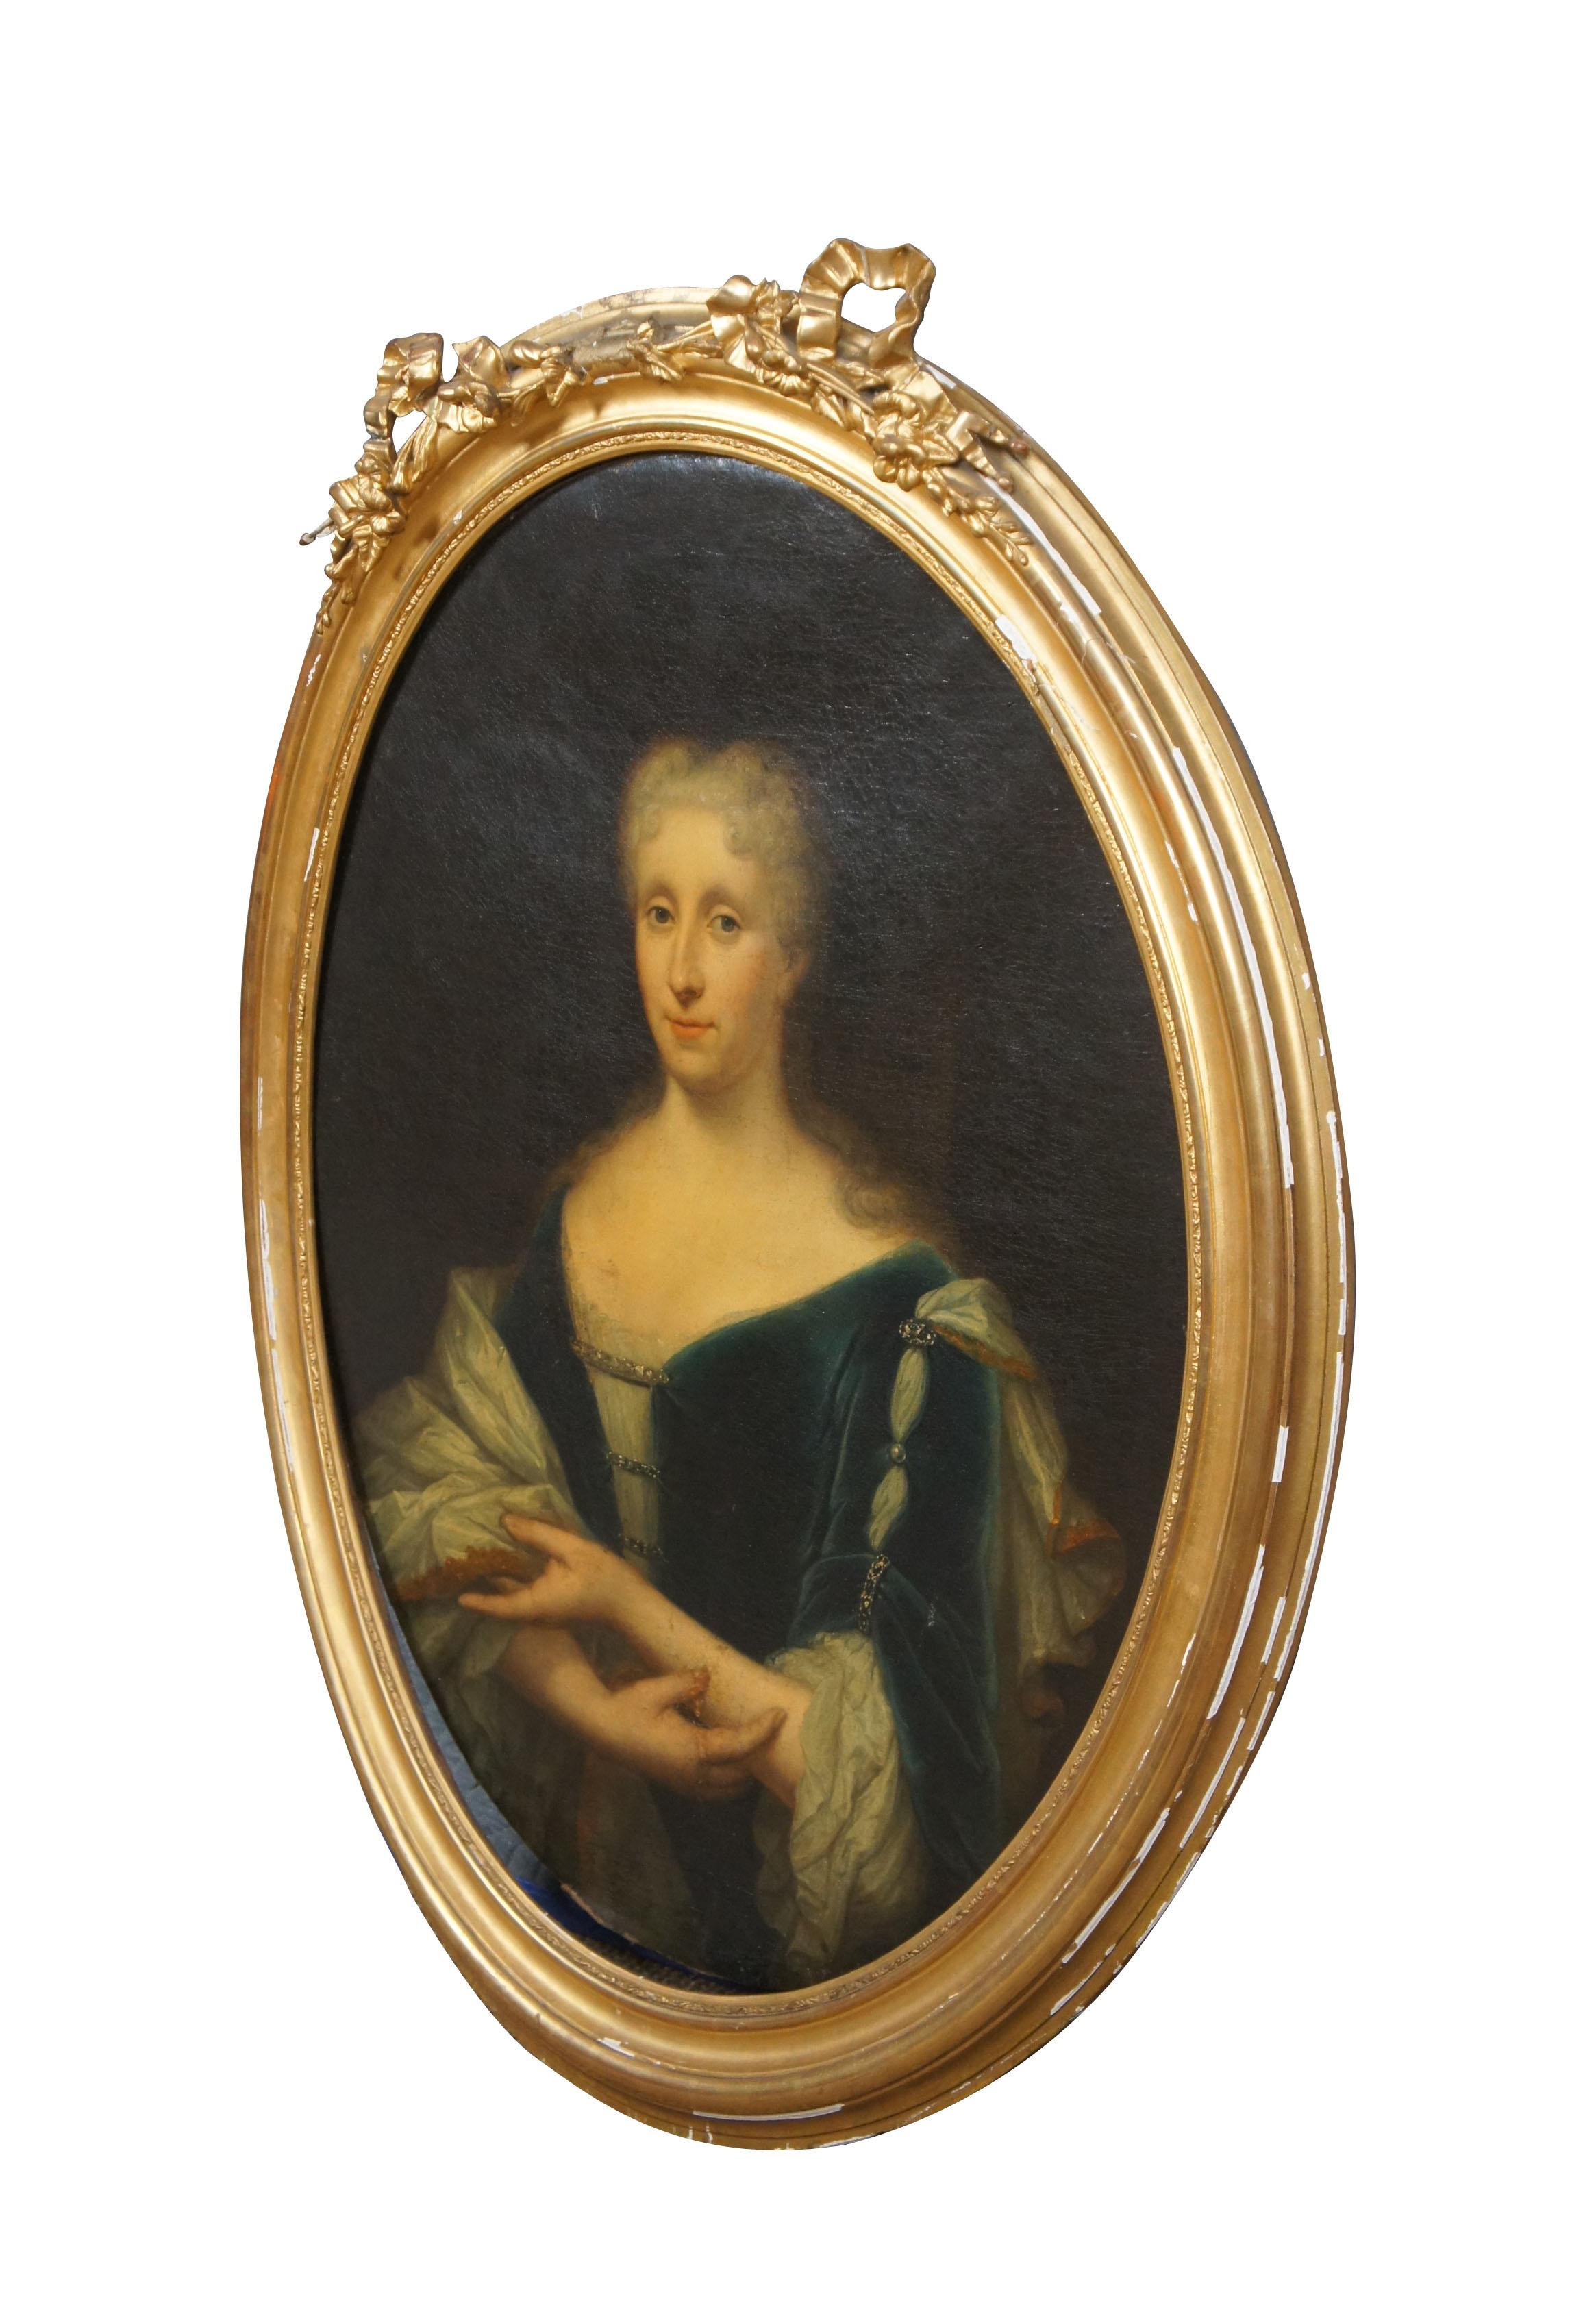 Dutch Colonial Antique 18th Century Dutch Oil Painting on Canvas Oval Portrait Seated Woman For Sale